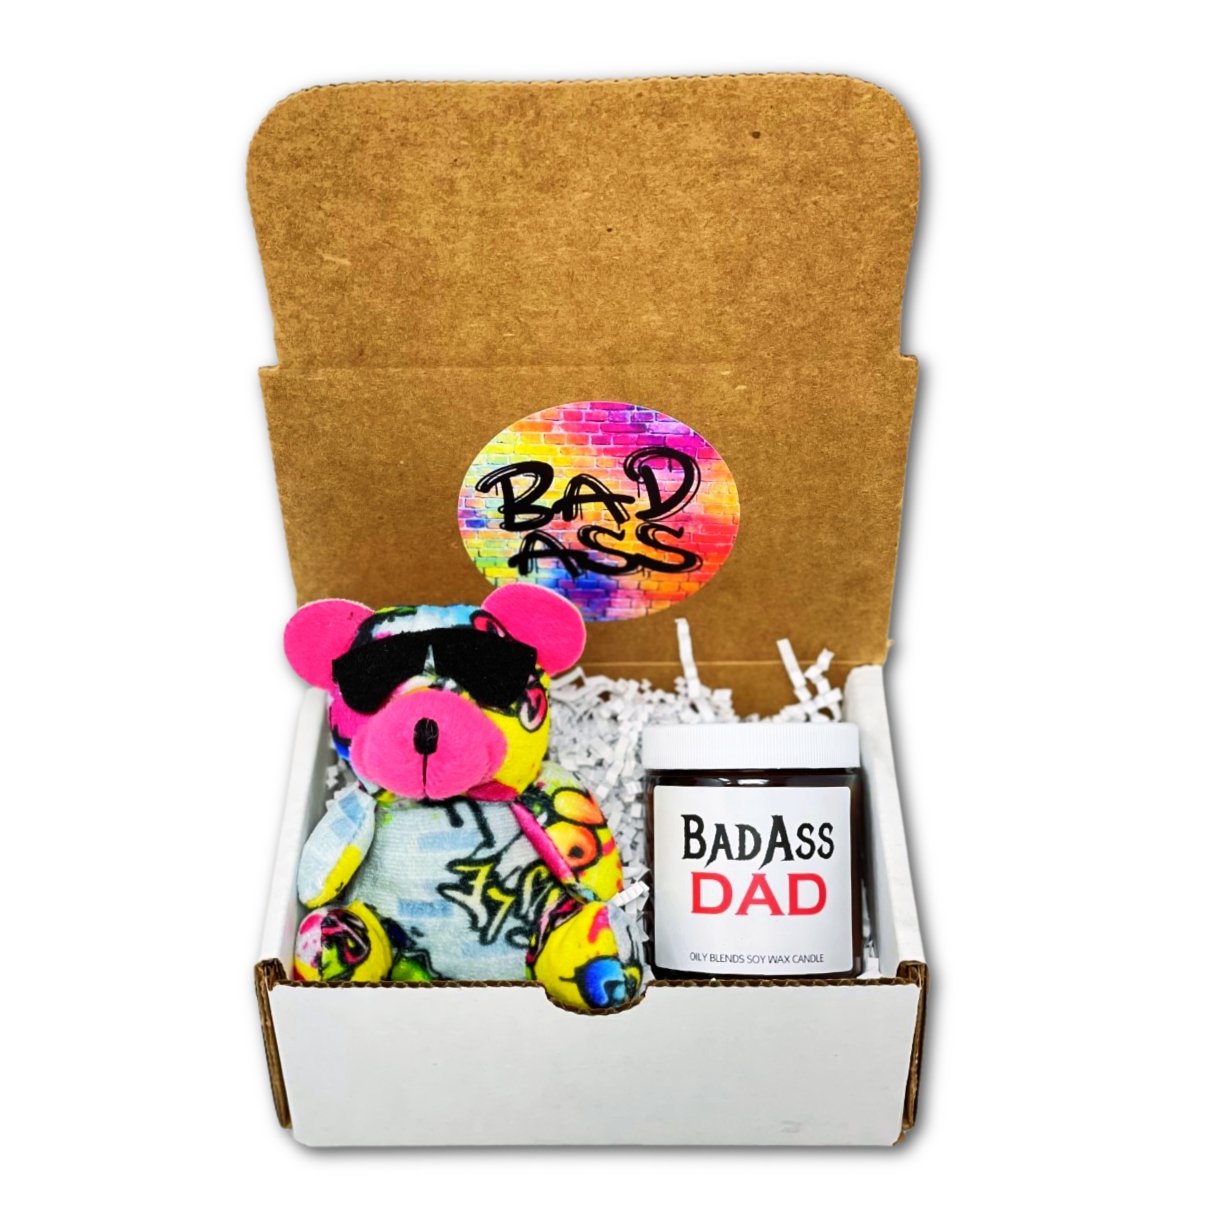 Bad Ass Gift Sets - Includes candles and badass plush - Oily BlendsBad Ass Gift Sets - Includes candles and badass plush